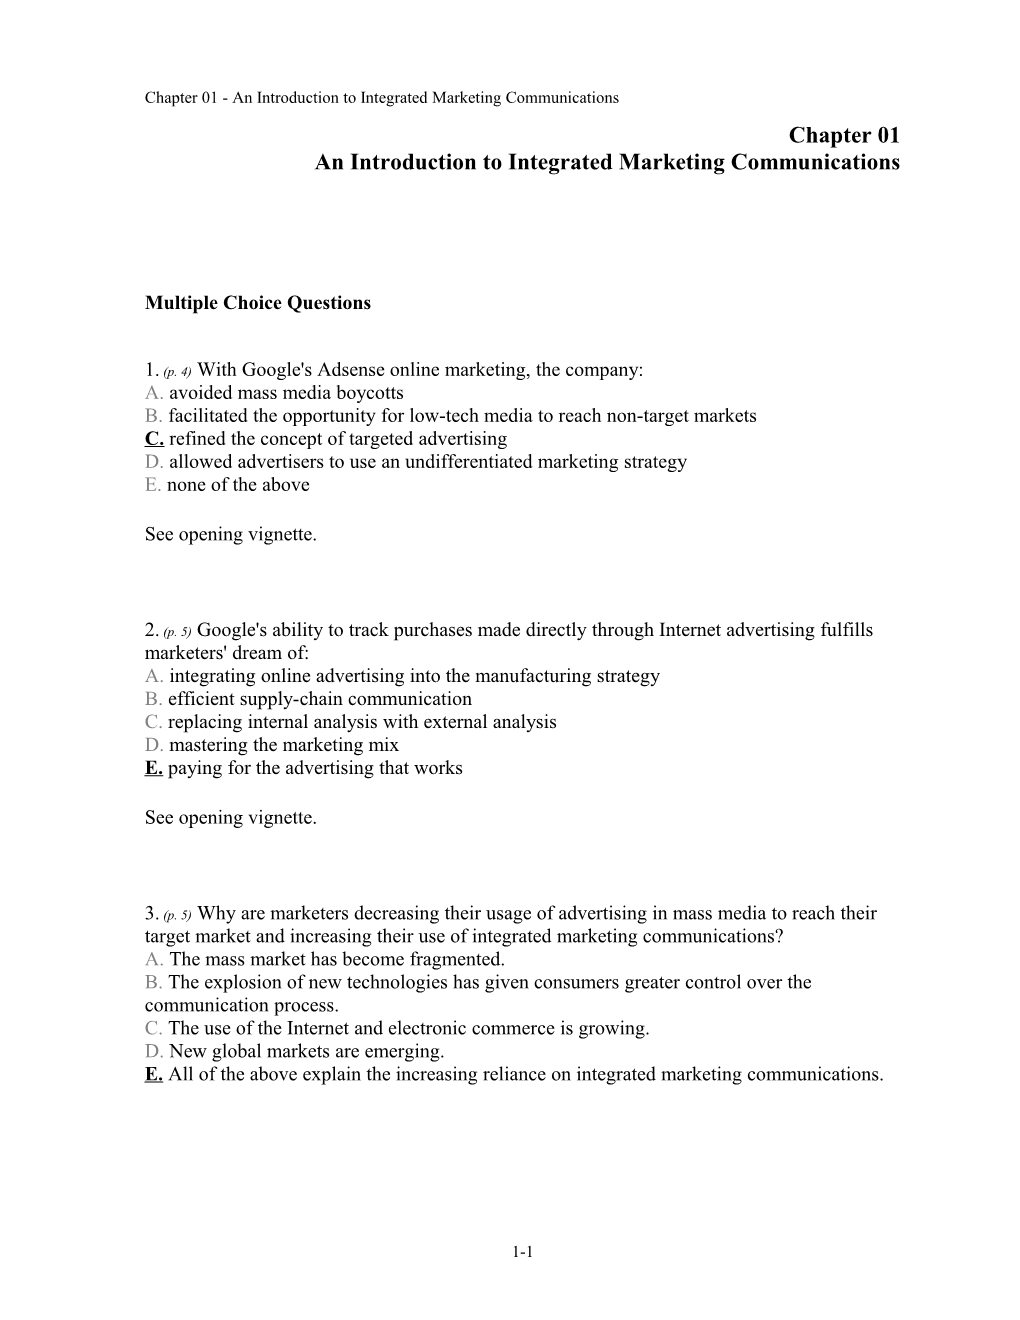 Chapter 01 an Introduction to Integrated Marketing Communications s1